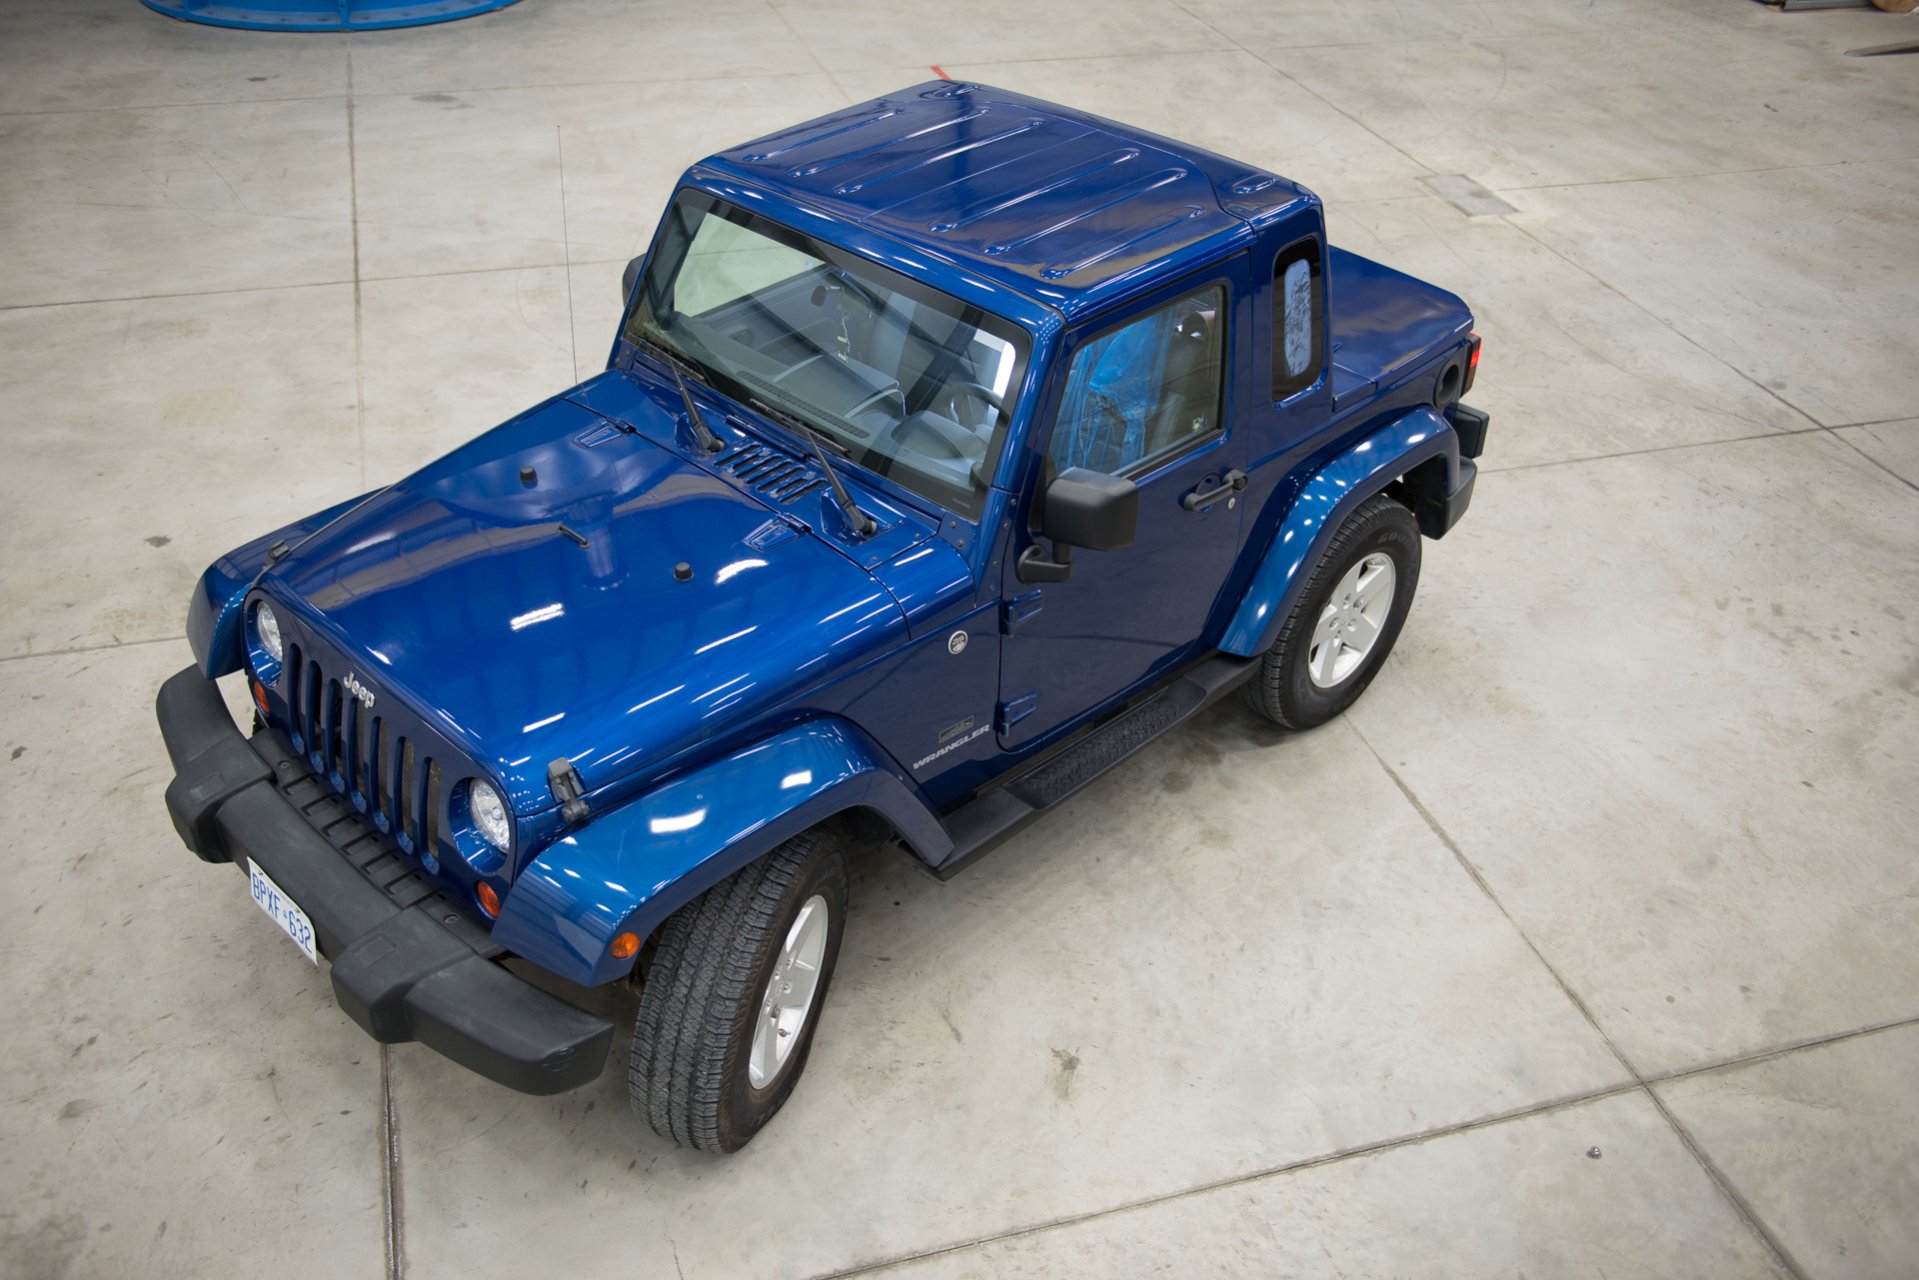 2009 Jeep Wrangler Rocky Mountain Pick up truck Watch|Share |Print|Report  Ad | Expedition Portal